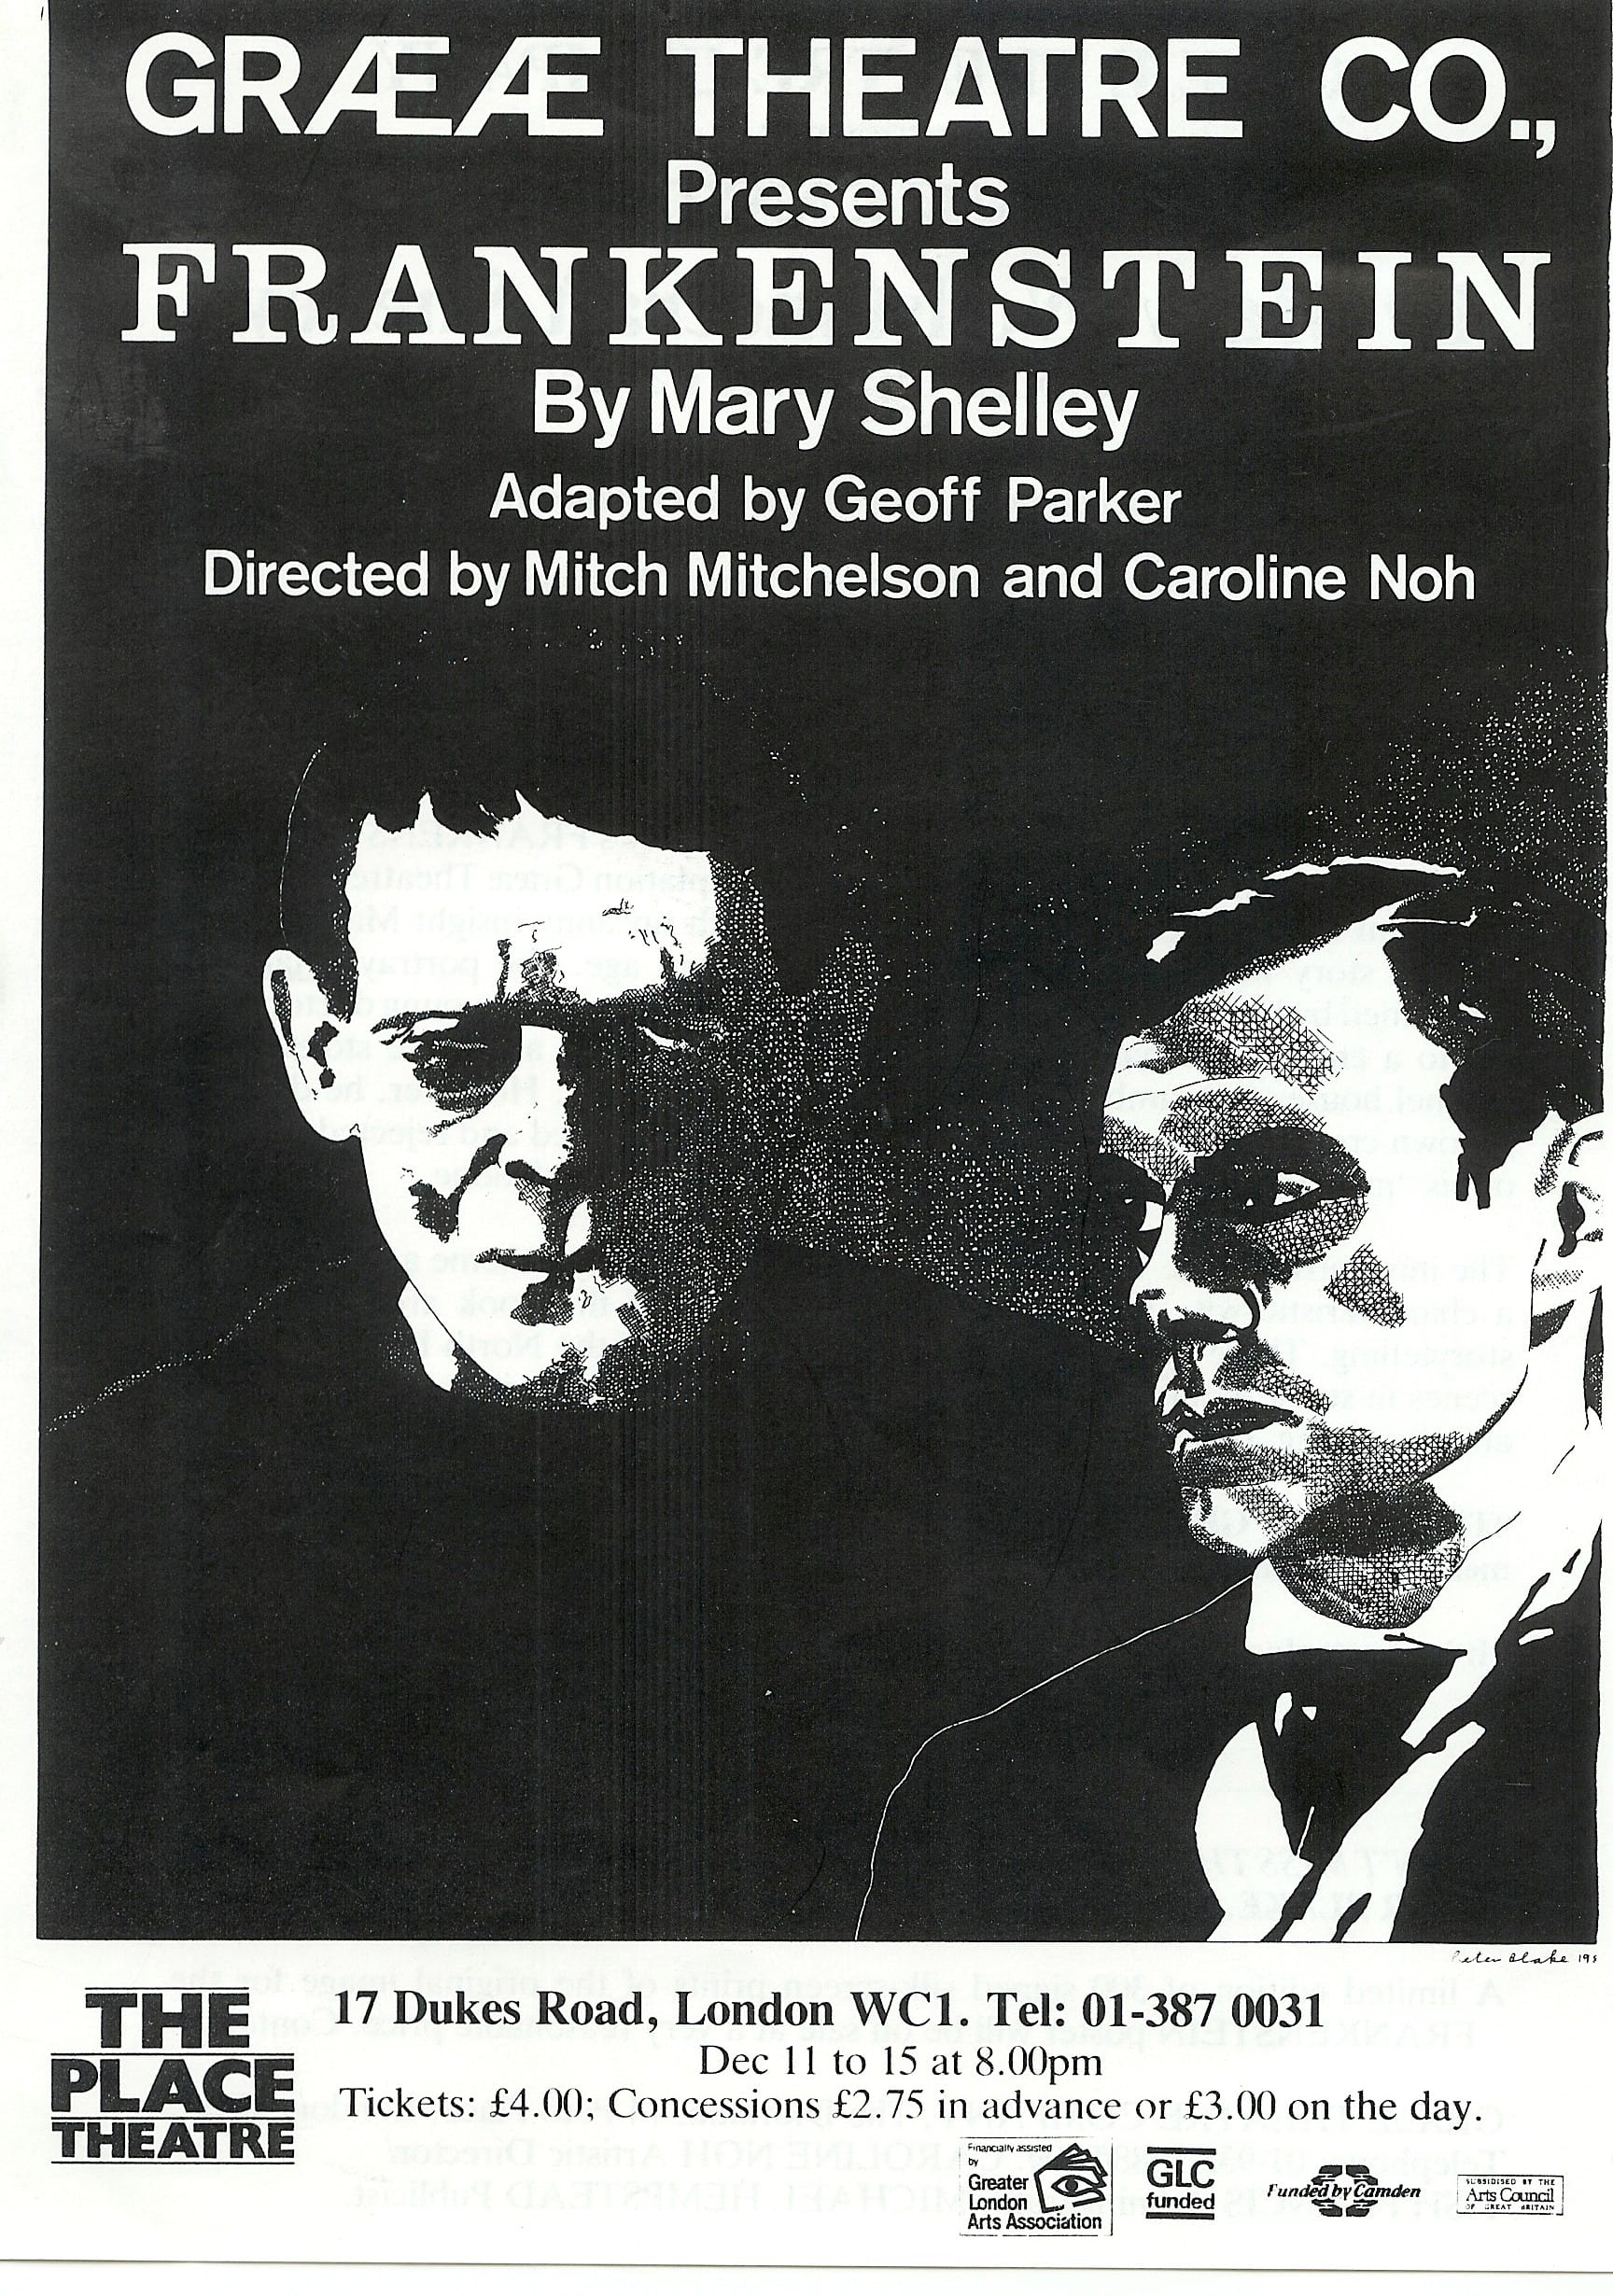 A poster for Graeae's production of 'Frankenstien' by Mary Shelley. The poster features a black and white illustration of Dr Frankenstein and his monster.